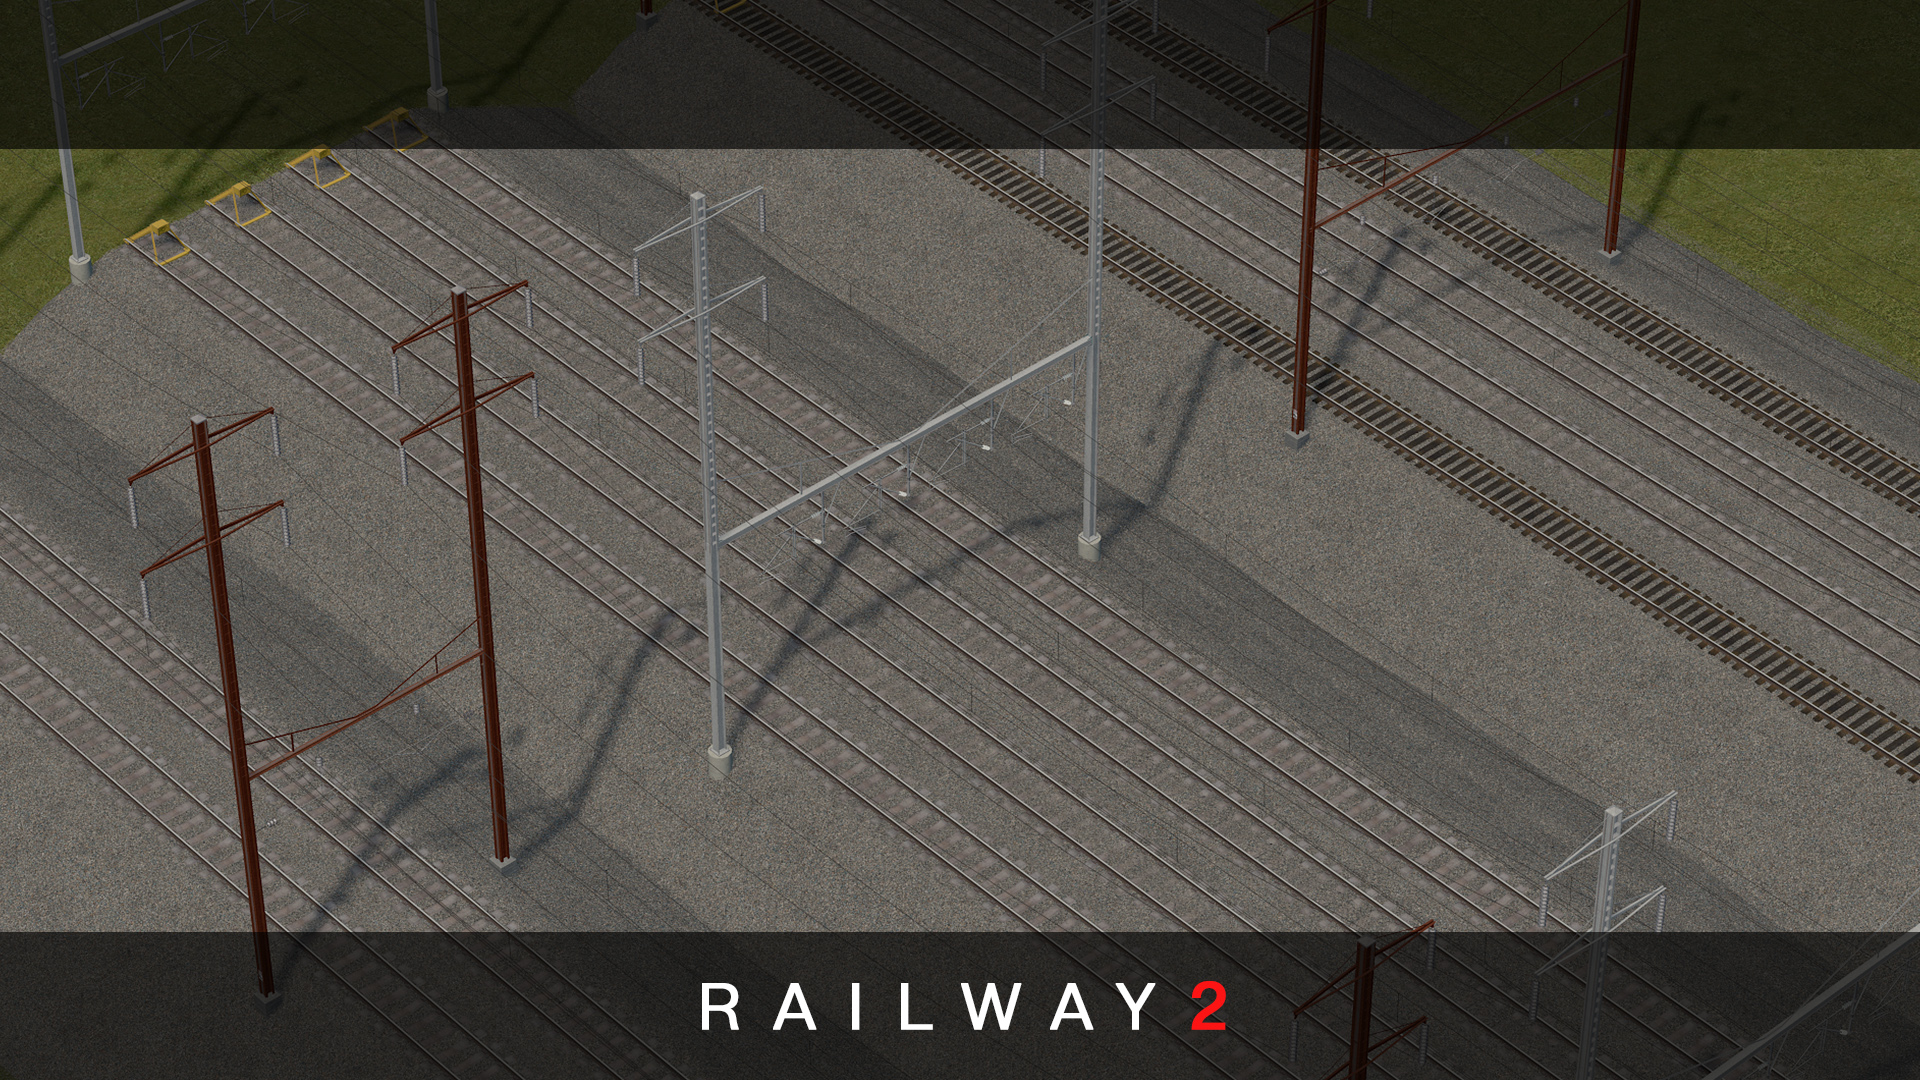 Cities: Skylines List of Railway 2 + Features + Modding Tutorial Information - 6. Stations: Tracks variants, Replacer and Platforms - E499F60